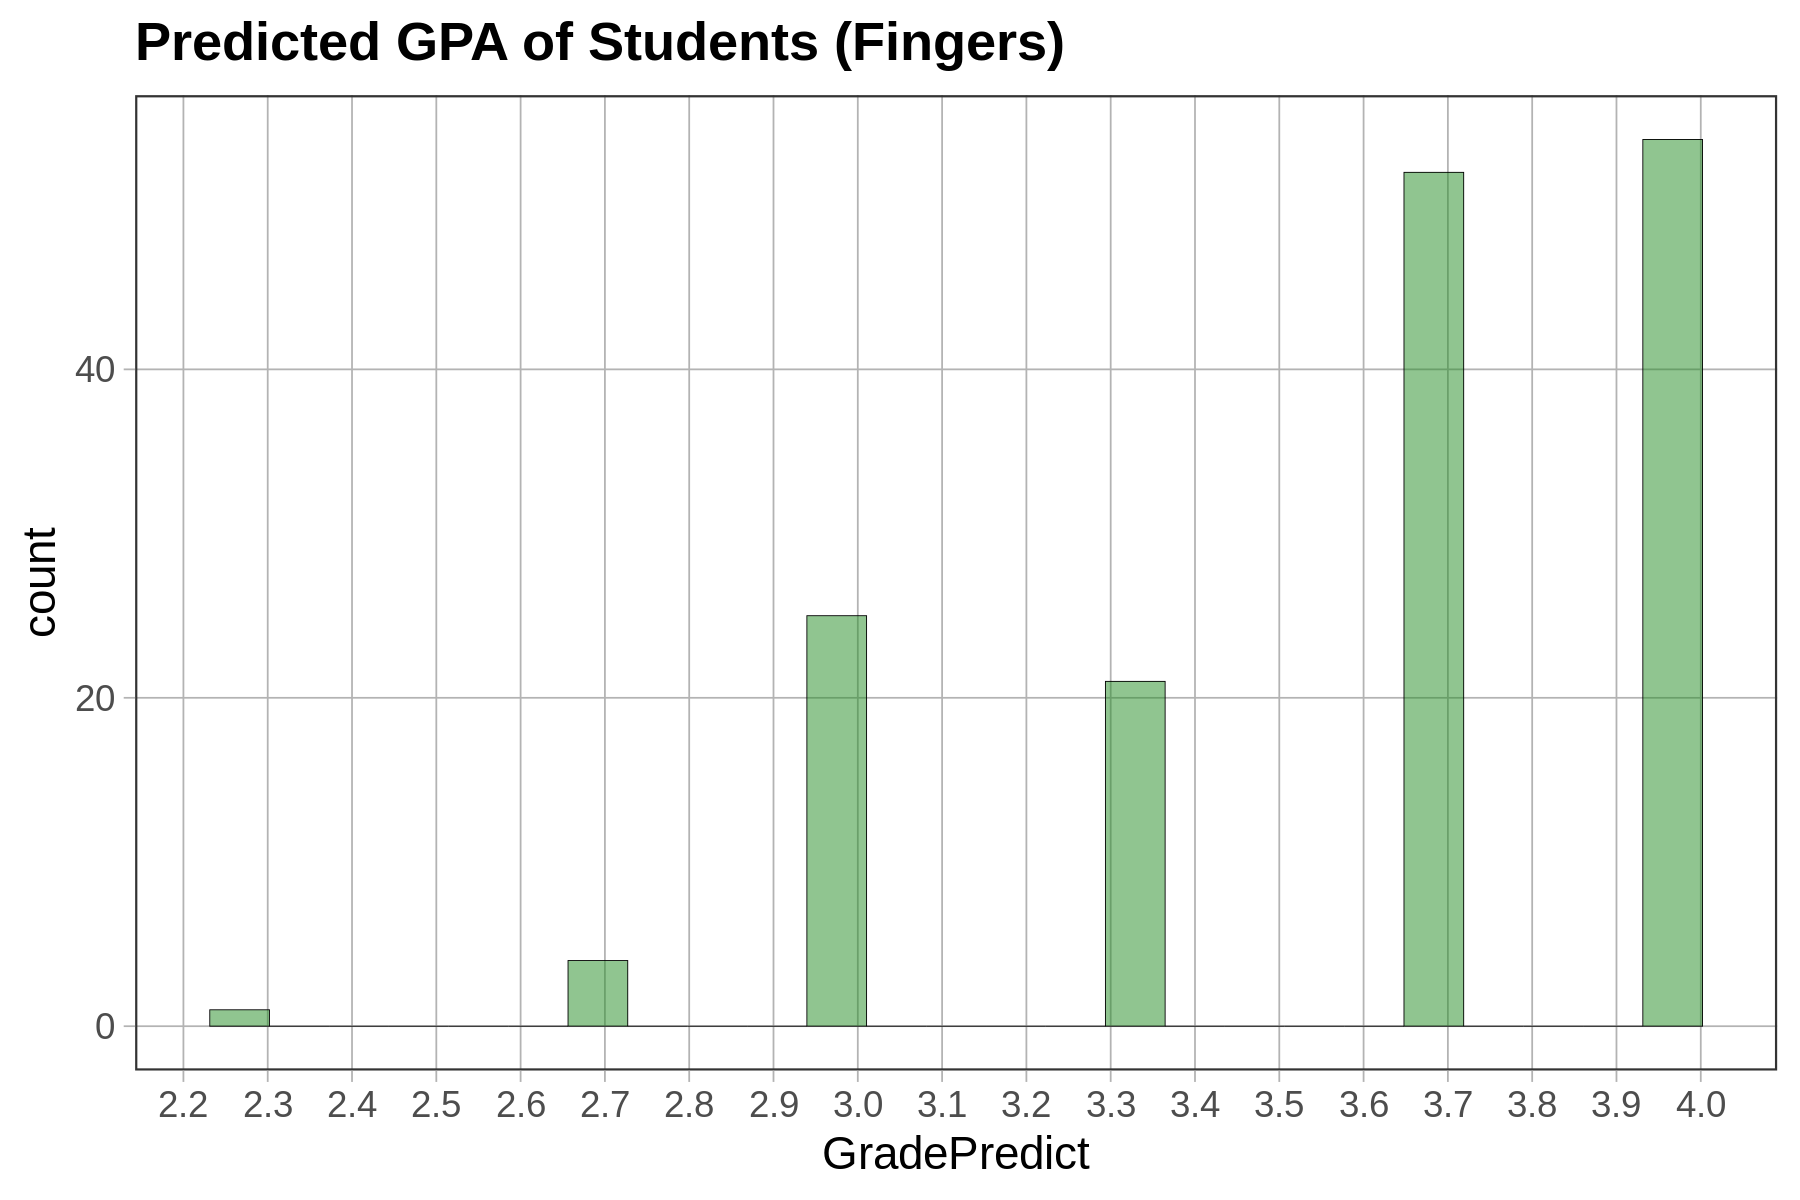 Histogram of GradePredict in Fingers. The distribution ranges from about 2.2 to 4.0 and is skewed left, with a peak near 3.7 to 4.0.